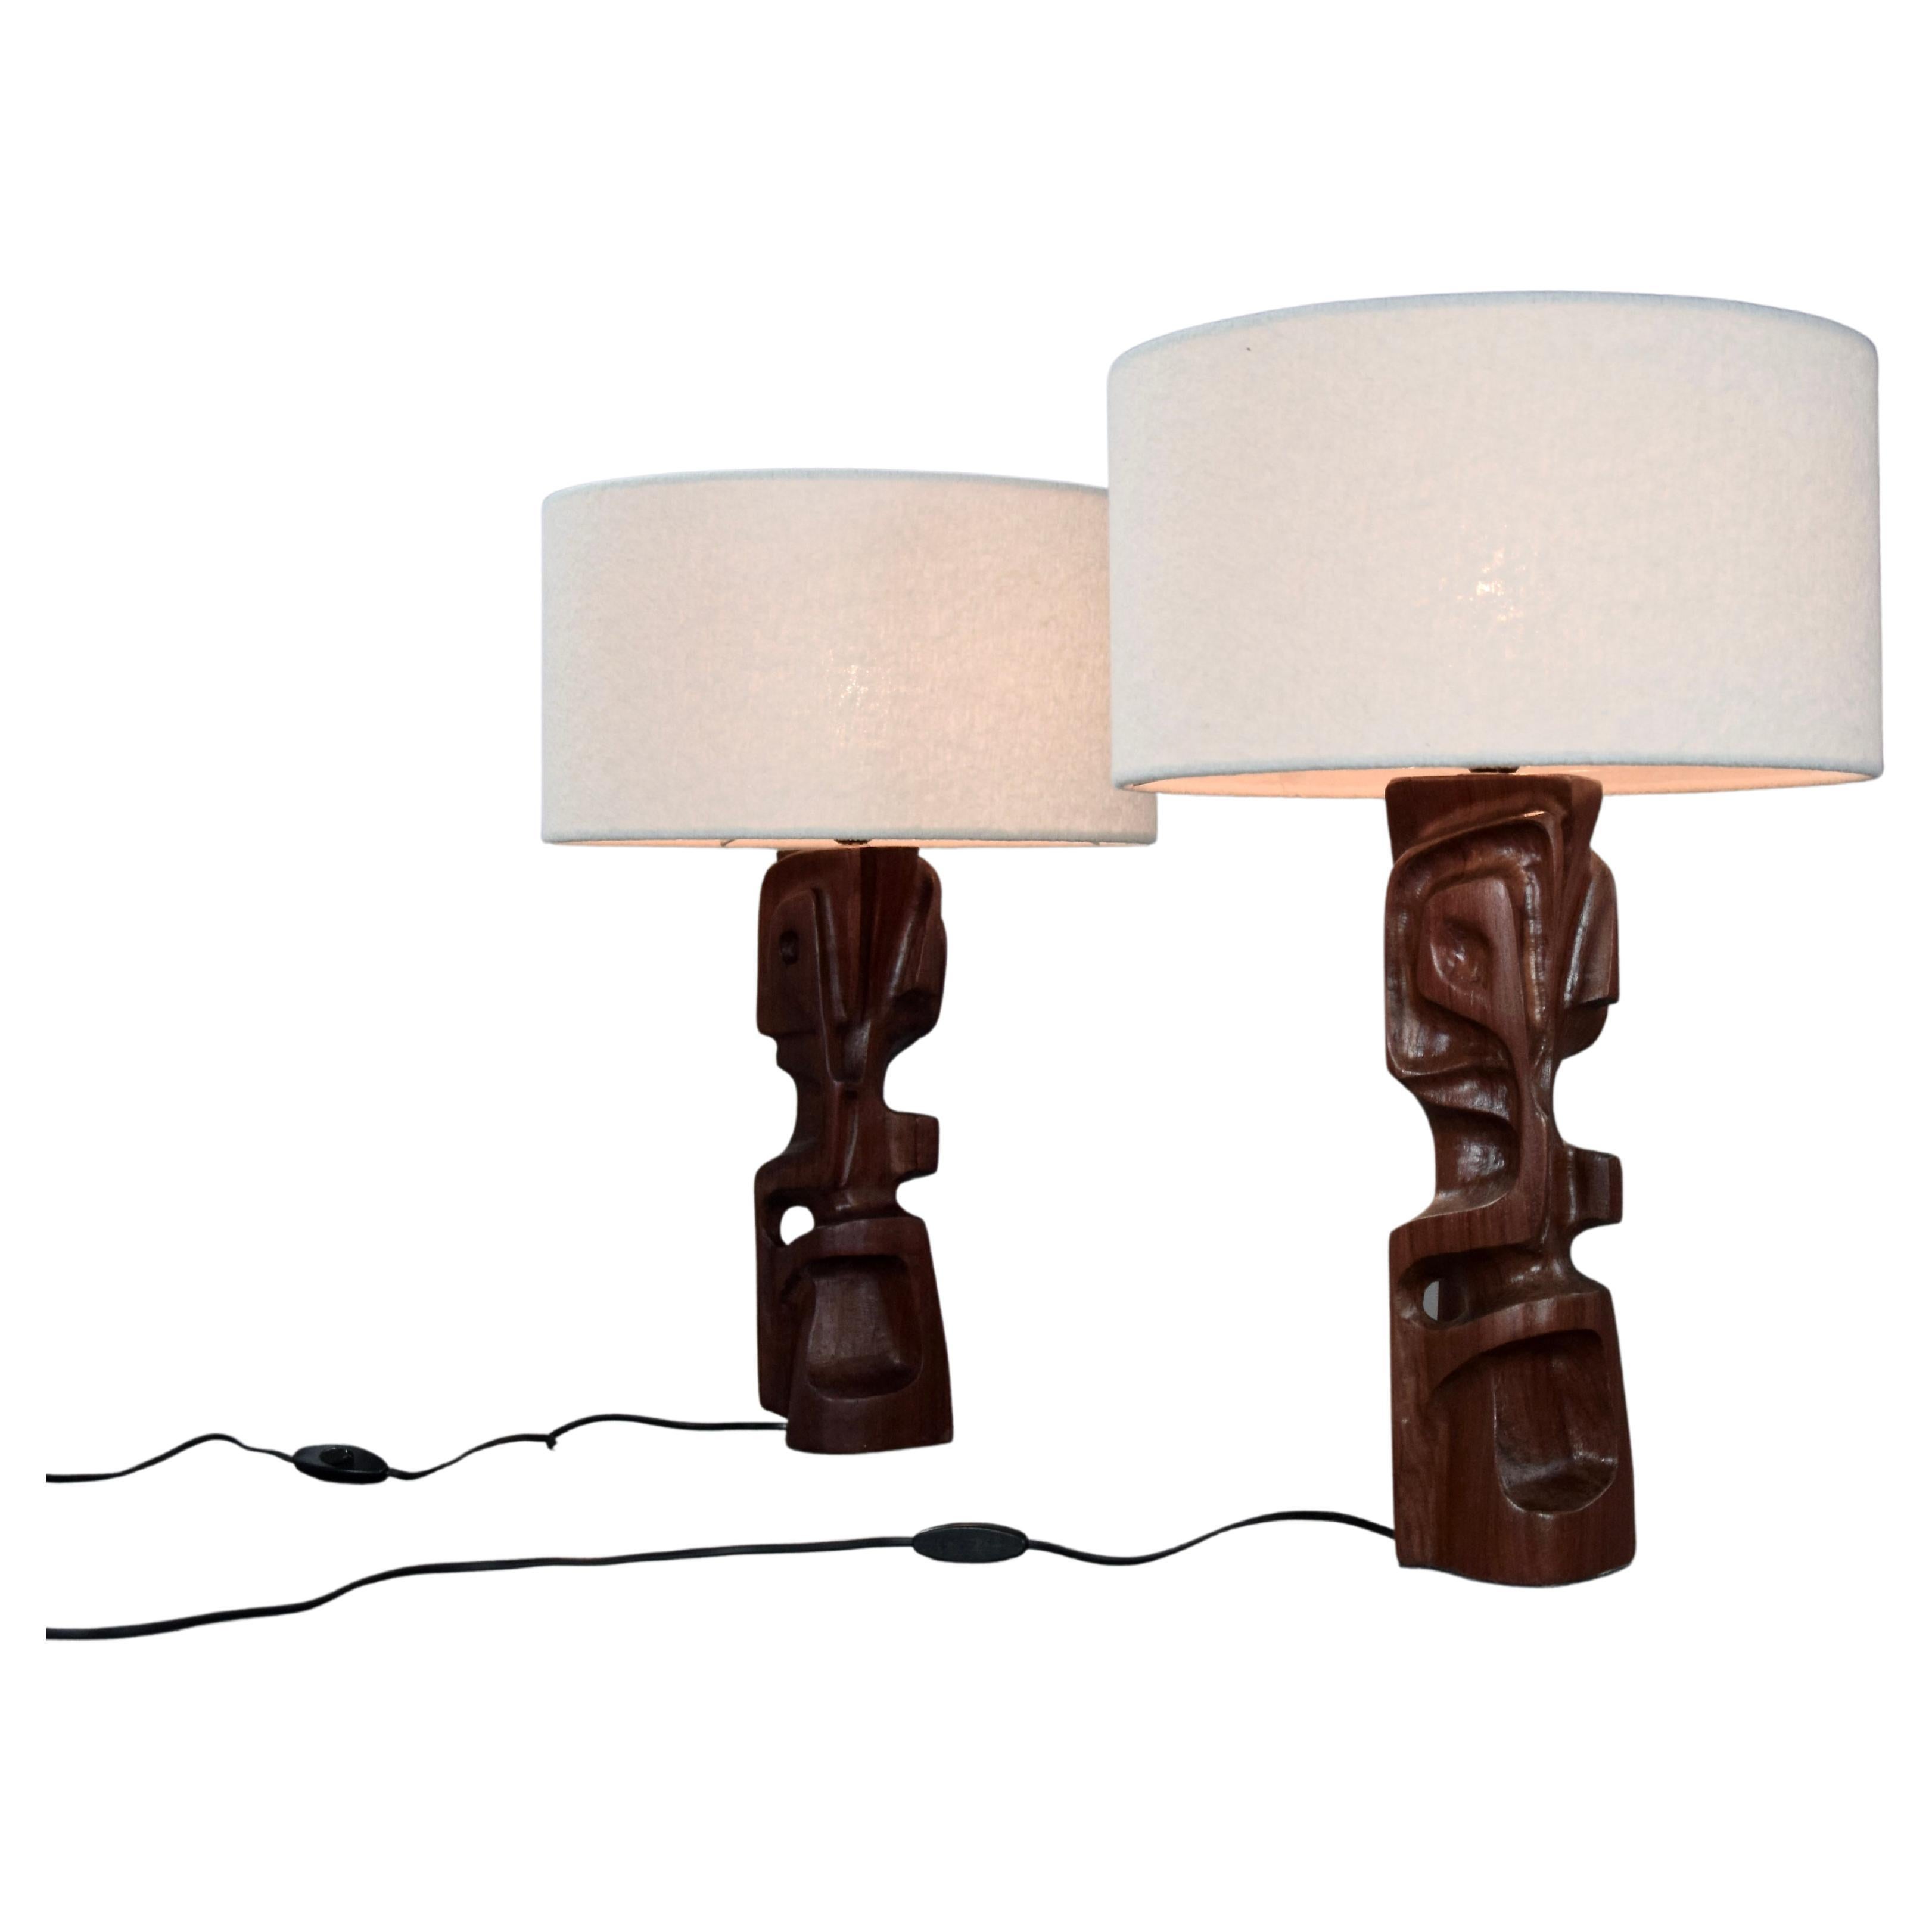 Mid-Century Modern Sculptural Carved Wooden Table Lamps by Gianni Pinna Italy